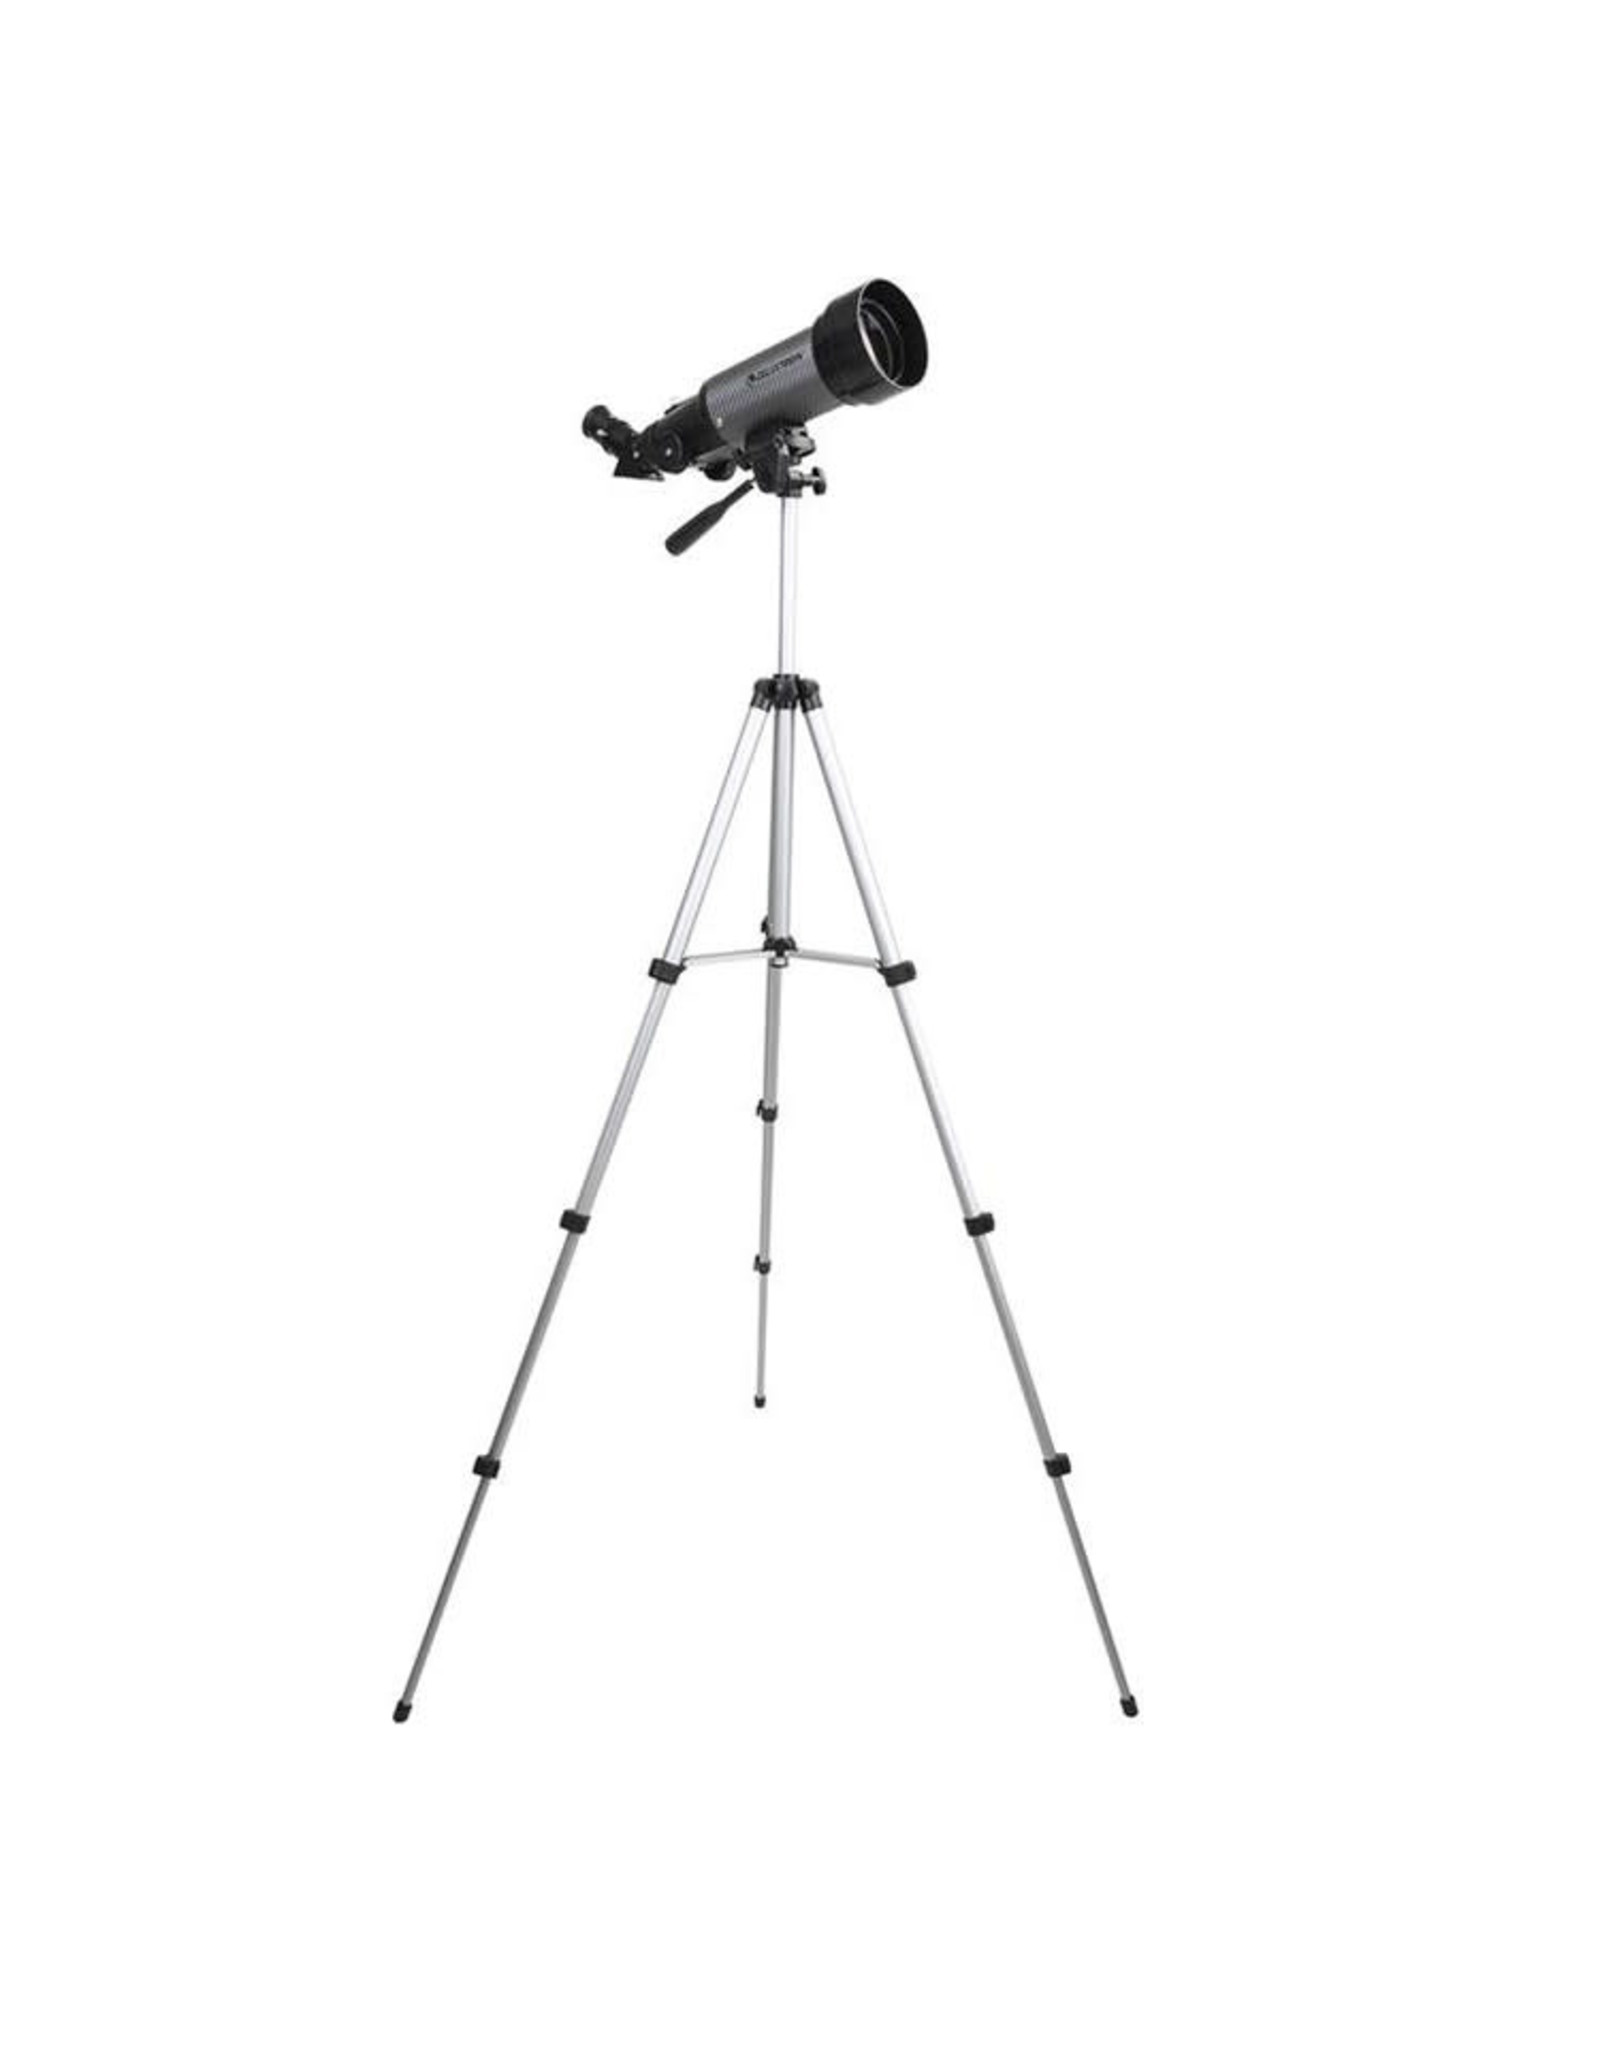 Celestron Travel Scope 70 DX with Backpack - Camera Concepts & Telescope  Solutions